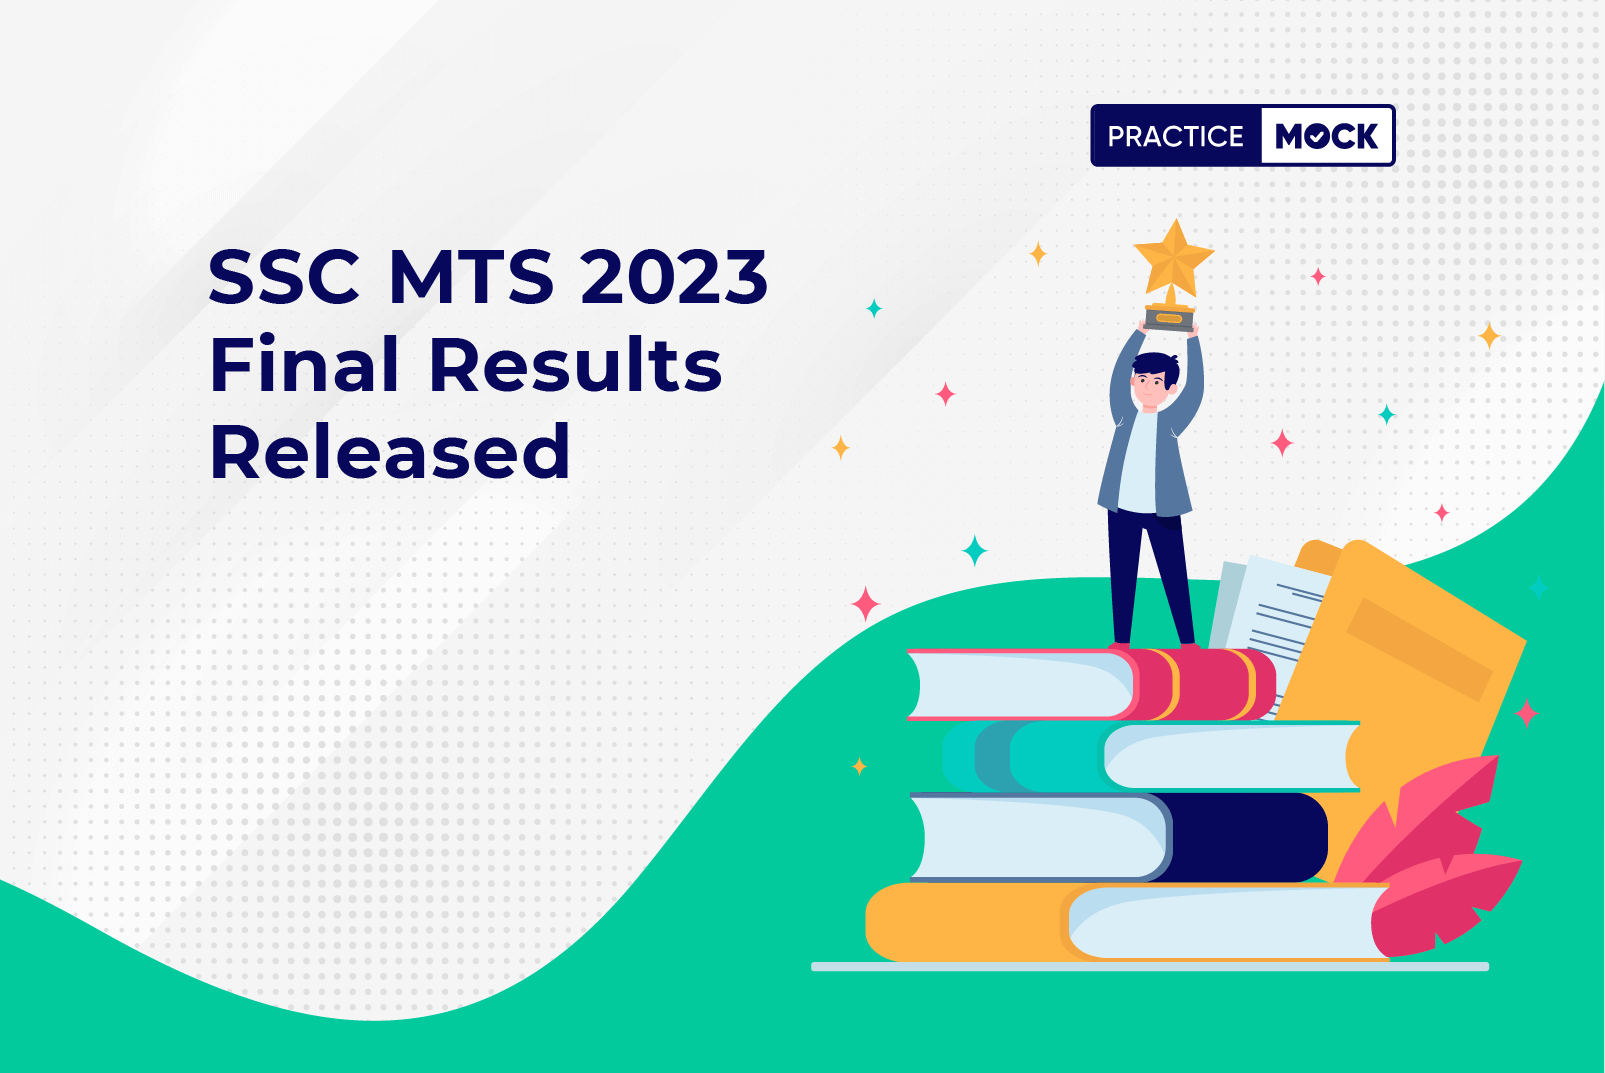 SSC MTS 2023 Final Results Released